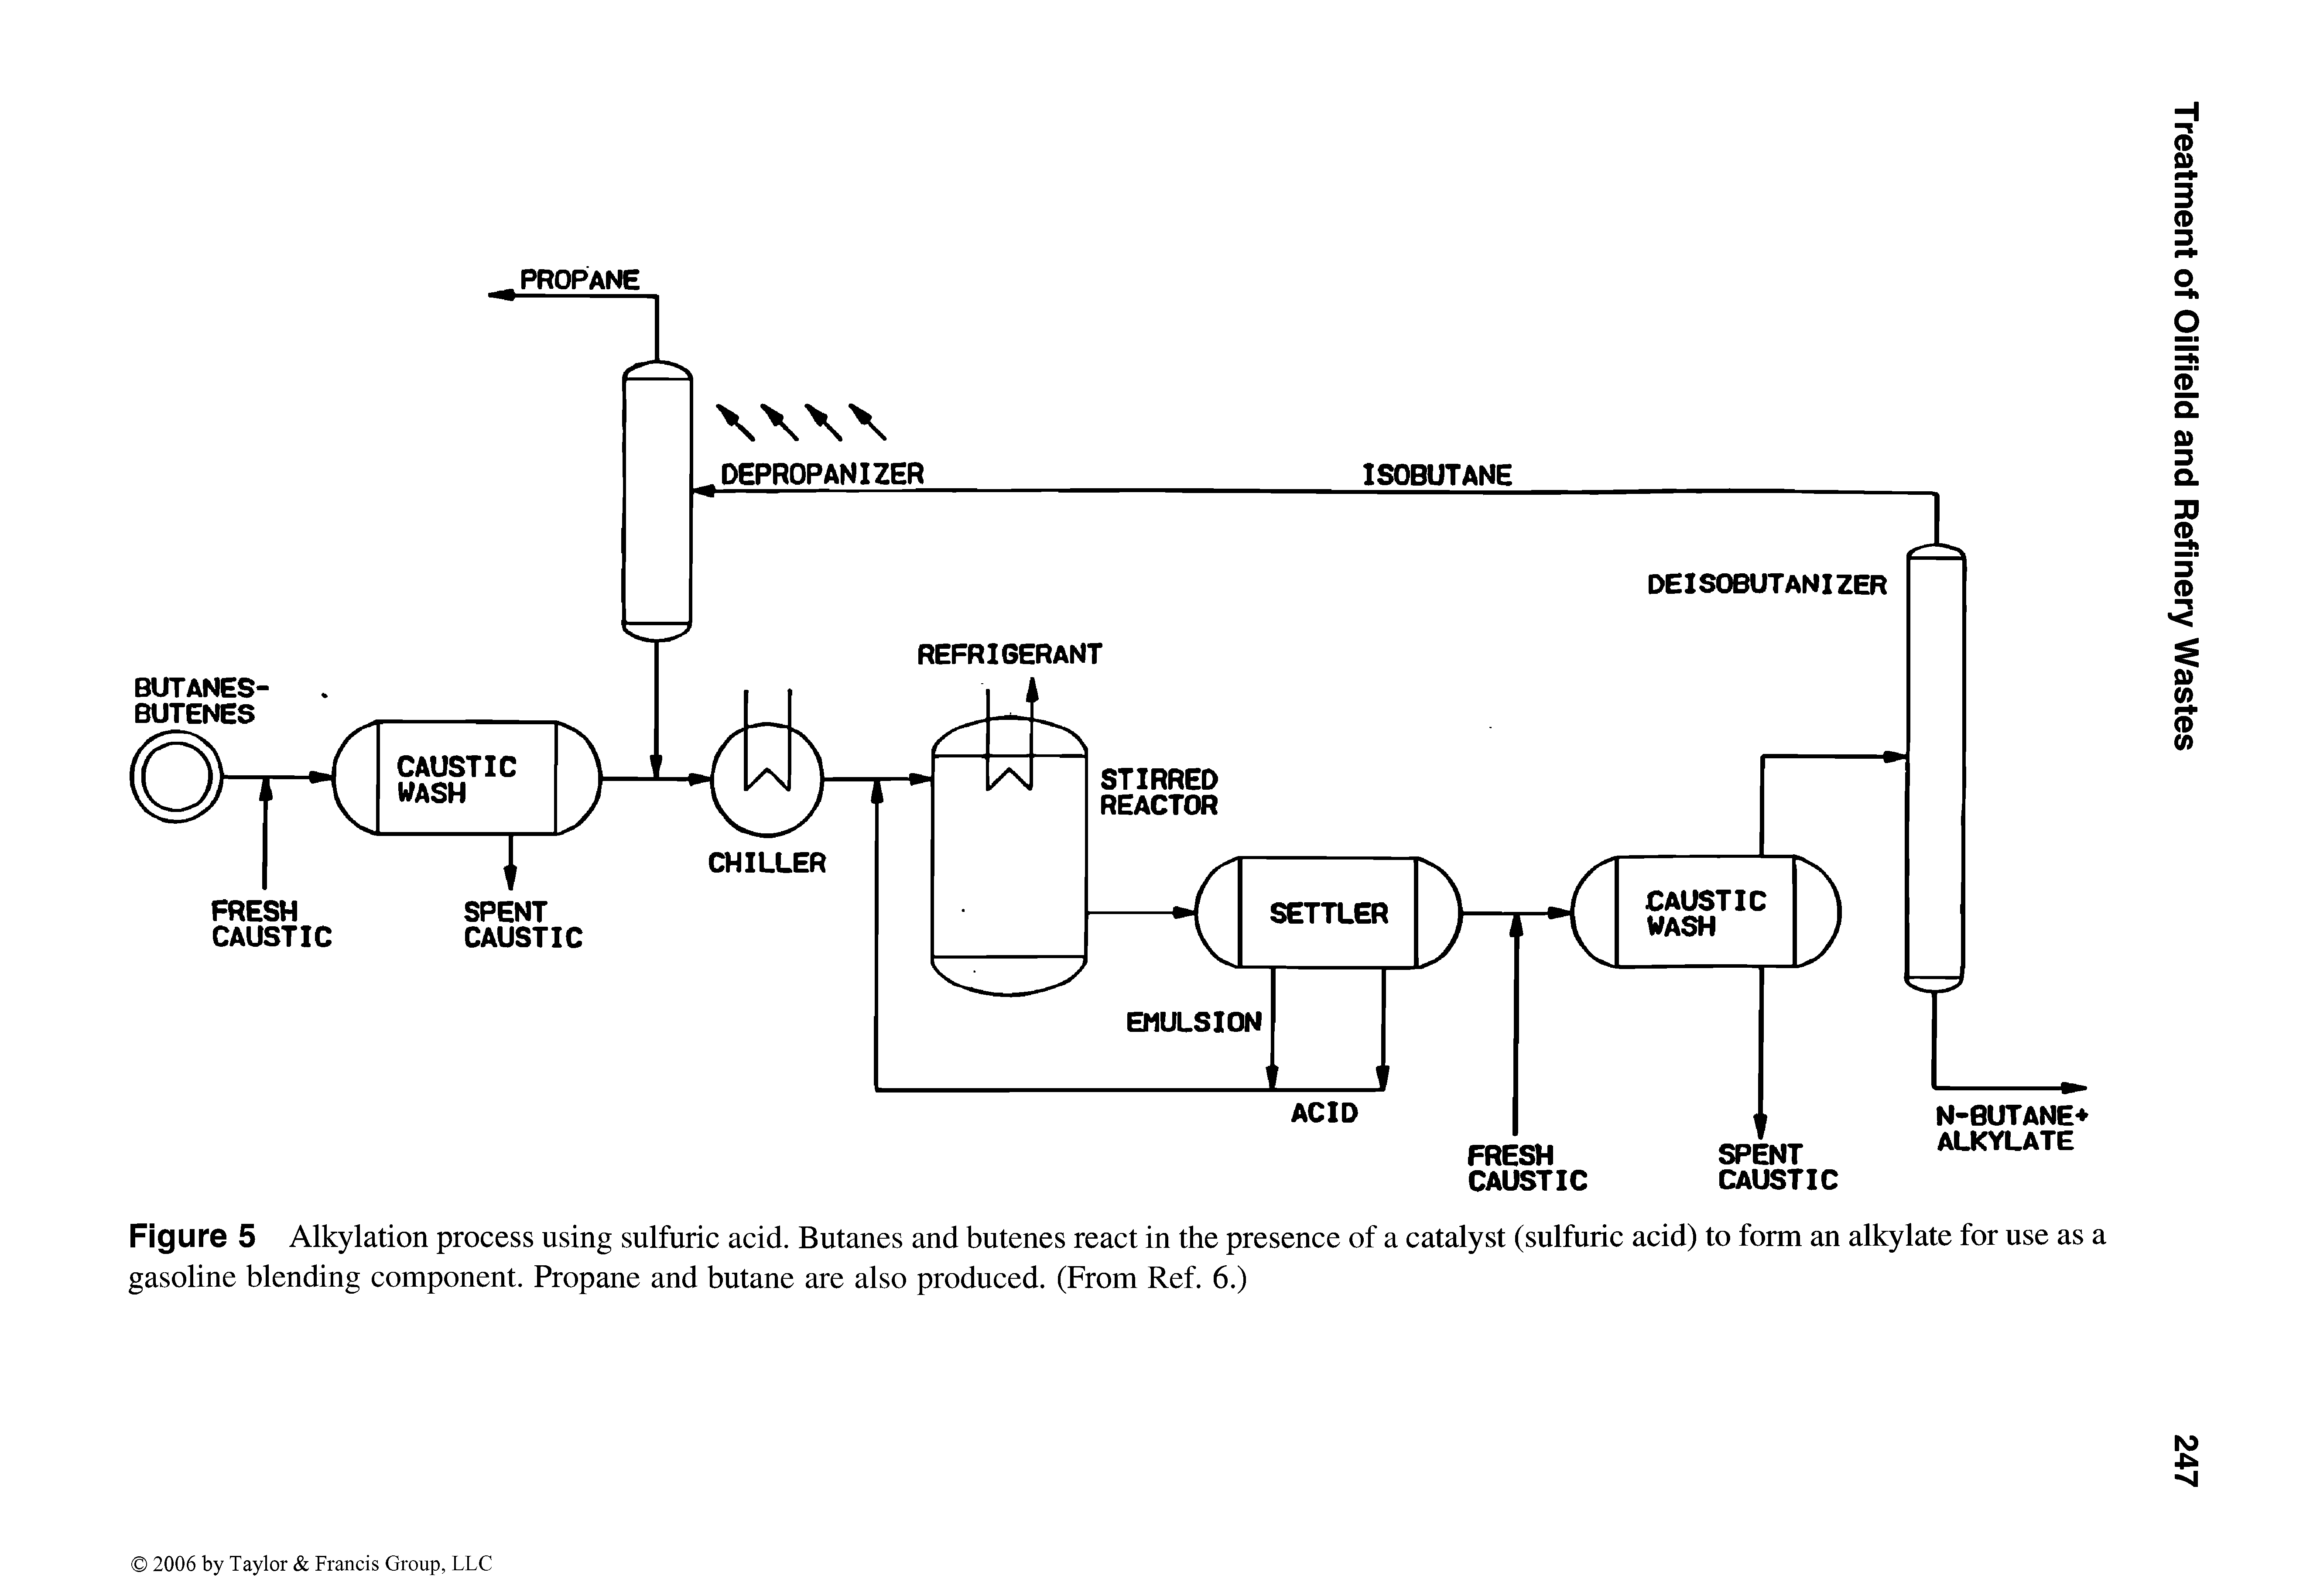 Figure 5 Alkylation process using sulfuric acid. Butanes and butenes react in the presence of a catalyst (sulfuric acid) to form an alkylate for use as a gasoline blending component. Propane and butane are also produced. (From Ref. 6.)...